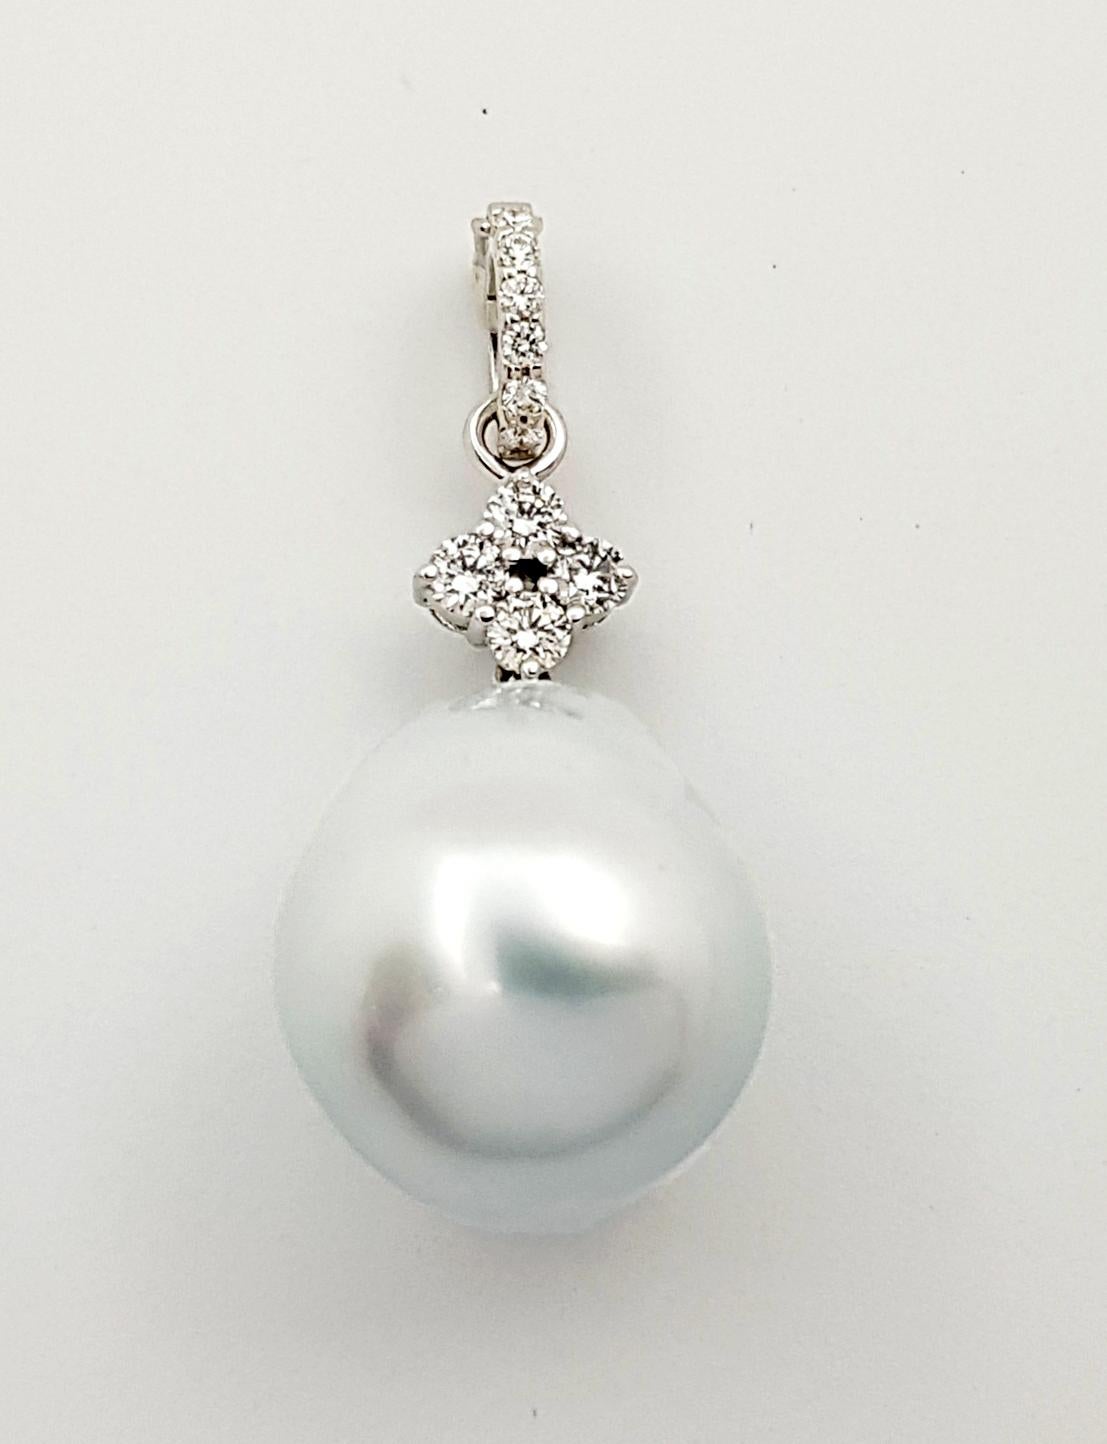 South Sea Pearl with Diamond 0.34 carat Pendant set in 18K White Gold Settings
(chain not included)

Width: 1.3 cm 
Length: 3.5 cm
Total Weight: 5.71 grams

South Sea Pearl Approximately: 14 mm

